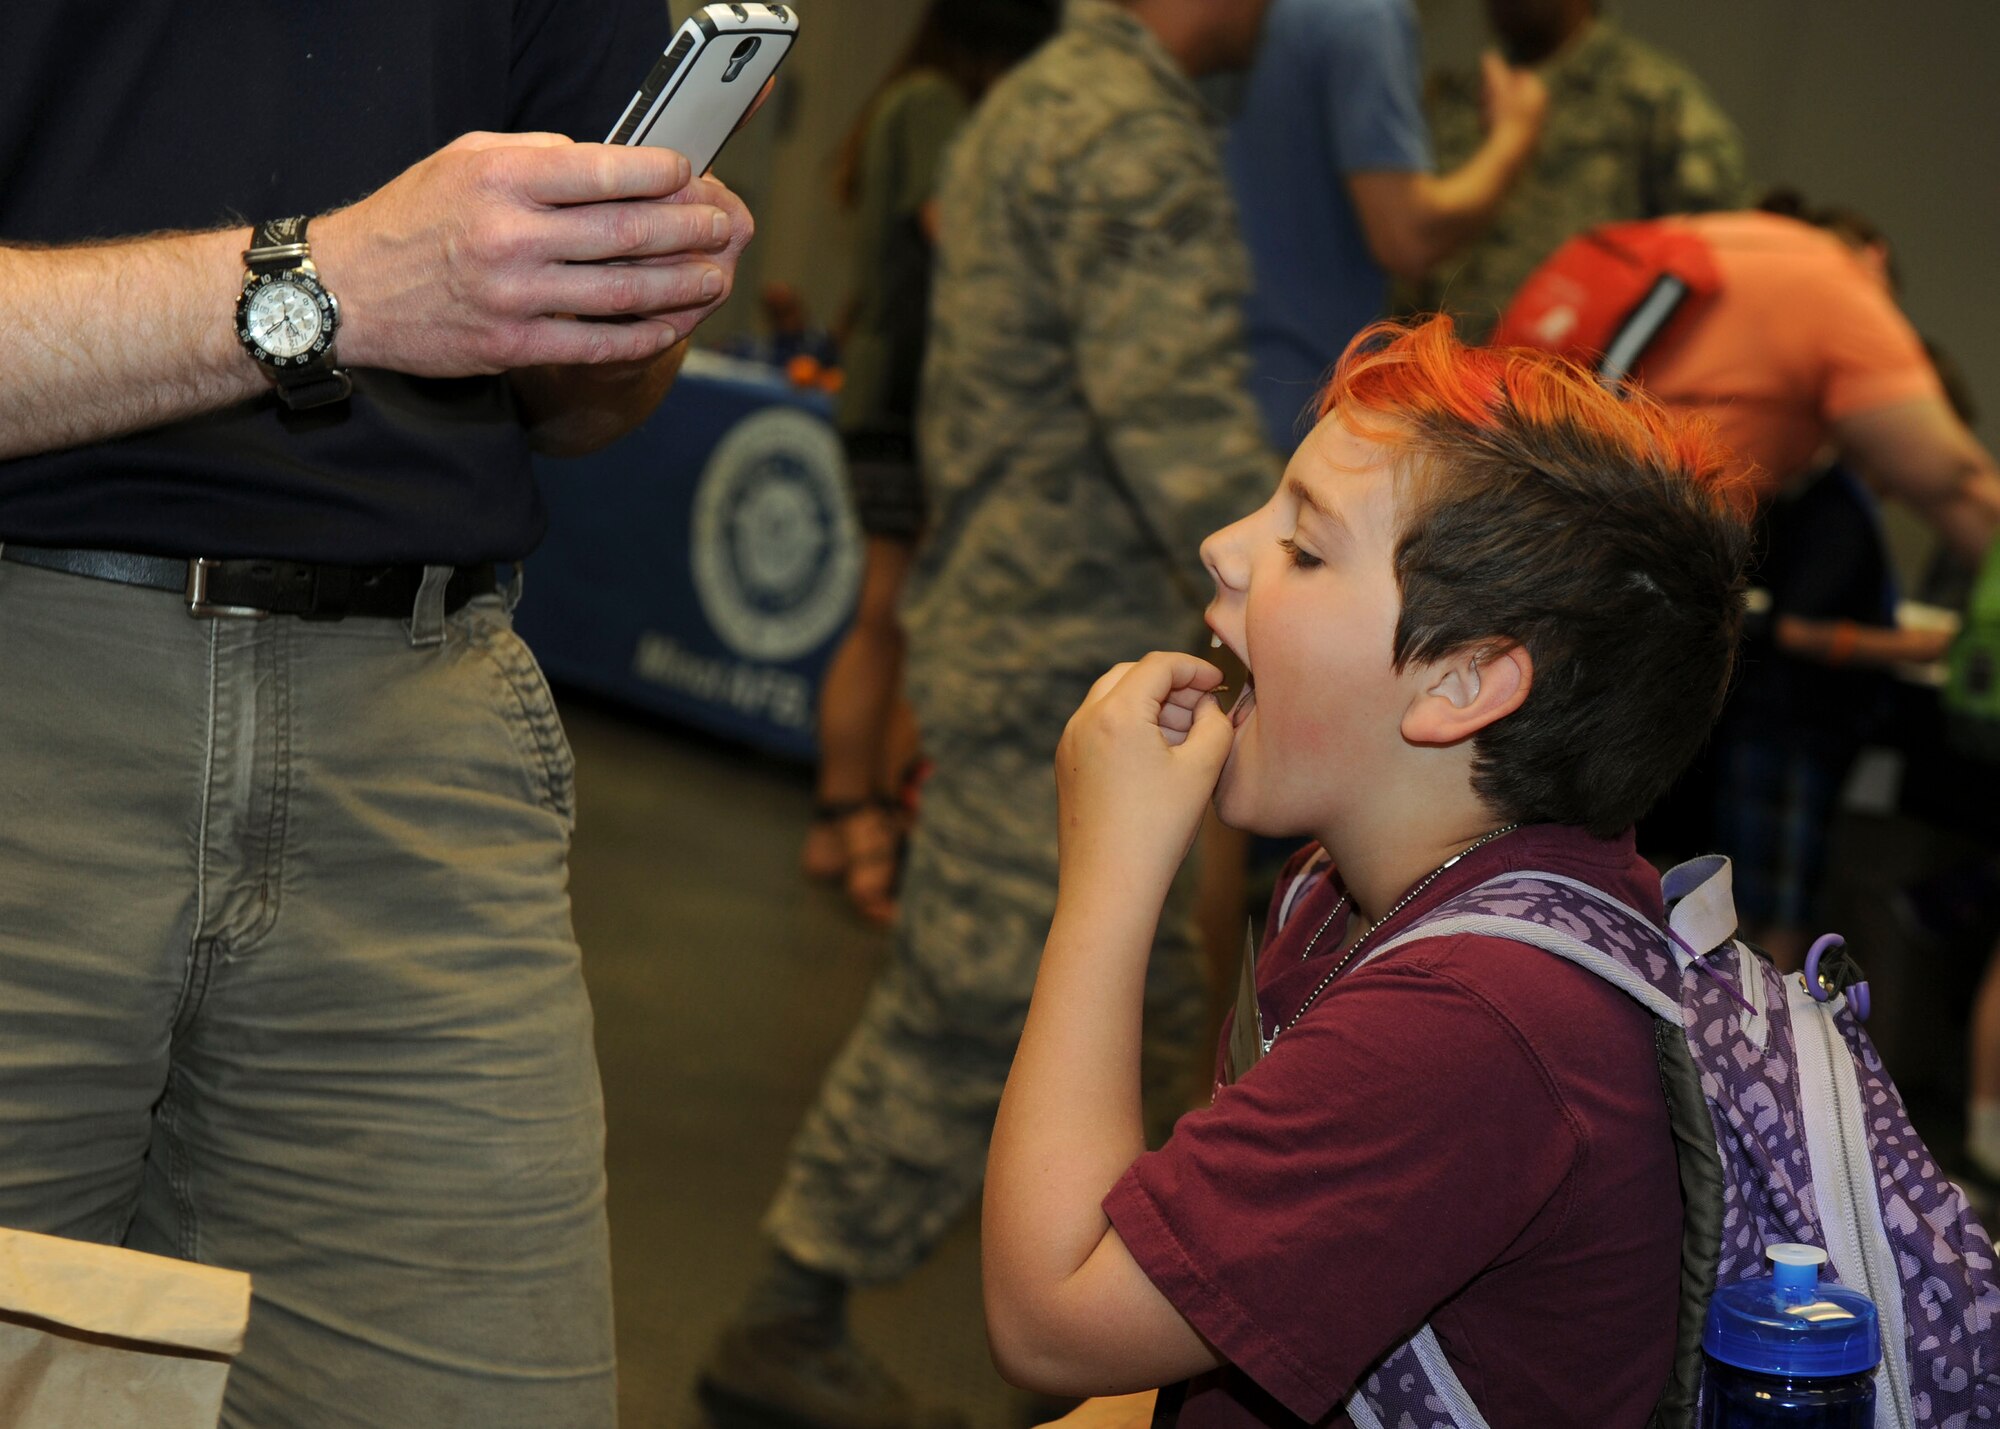 A child eats an insect at the Survival, Evasion, Resistance and Escape booth during Operation Heroes at Minot Air Force Base, N.D., June 3, 2017. During the event, children tasted Meals Ready-to-Eat, tried on gear, saw weapons displays and created custom-made dog tags. The event concluded with a redeployment line and a welcome home celebration. (U.S. Air Force photos/Senior Airman Sahara L. Fales)